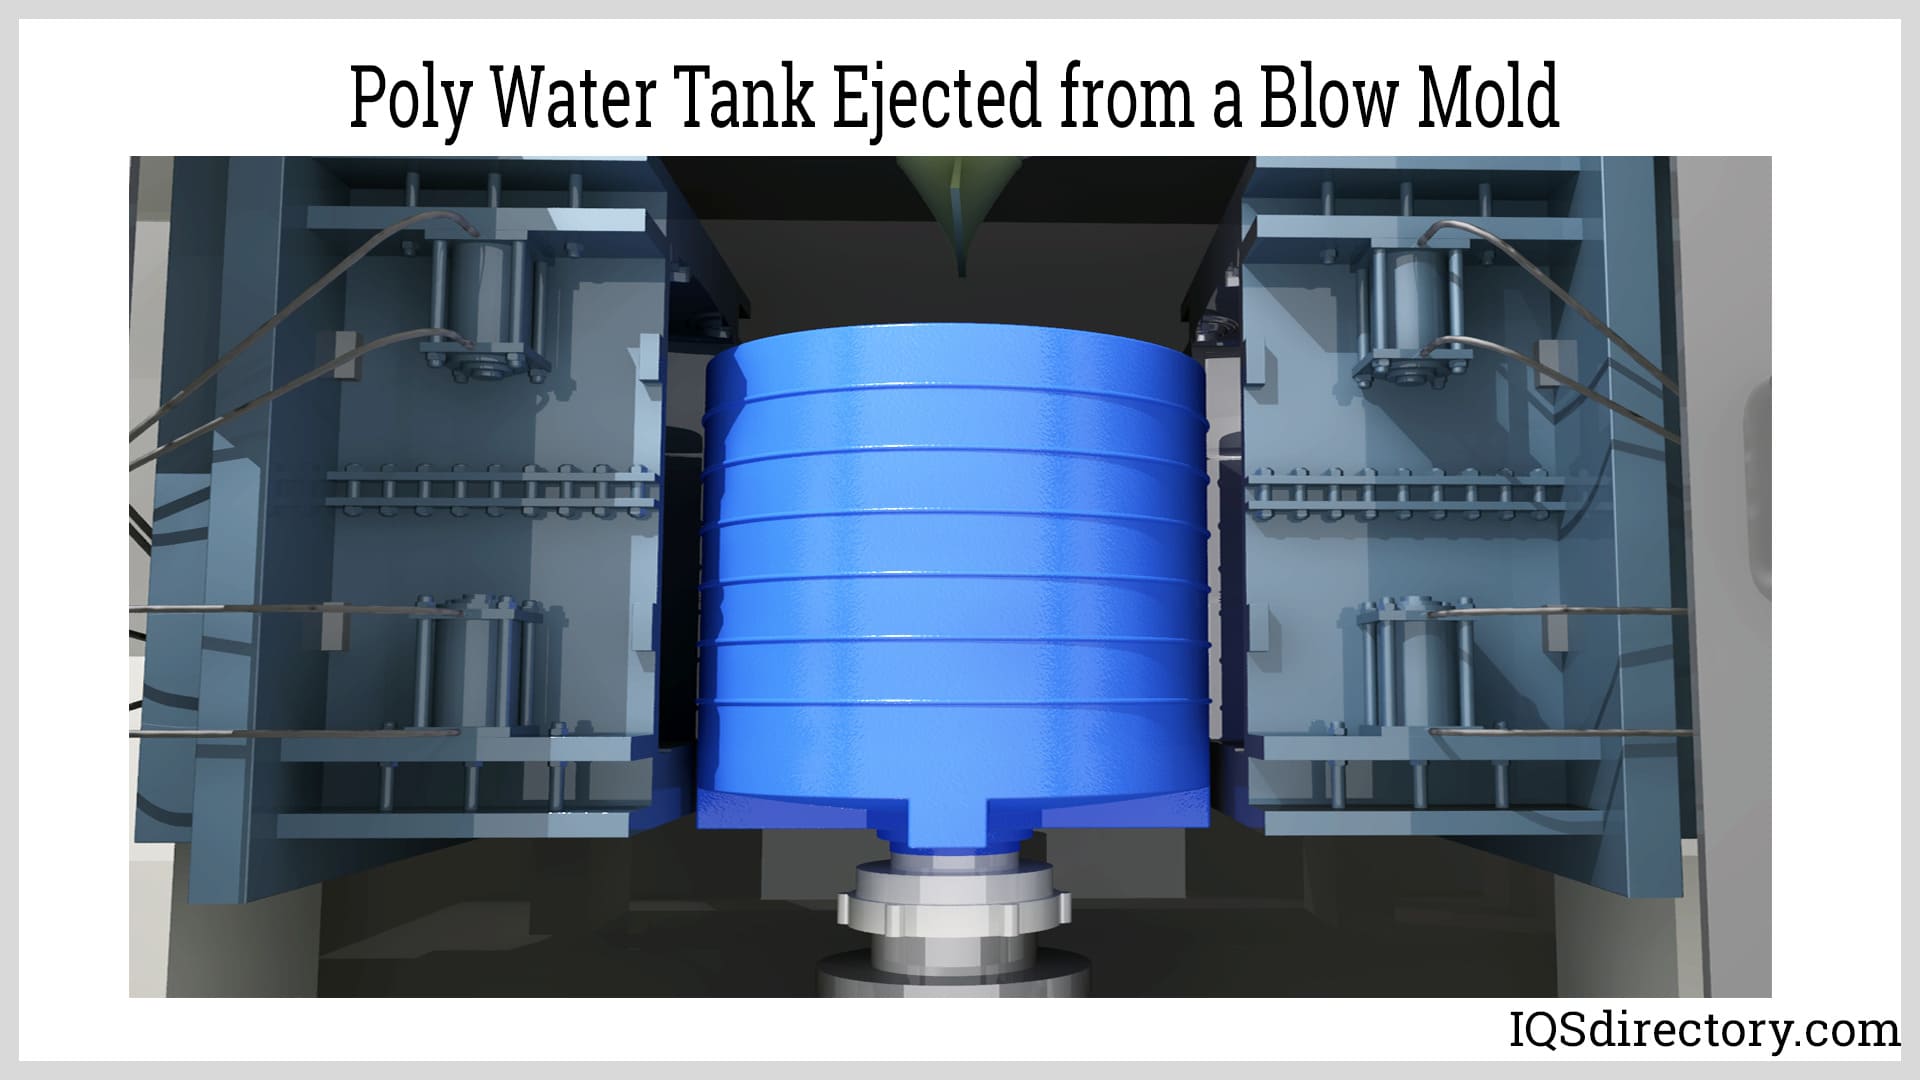 Poly Water Tank Ejected from a Blow Mold